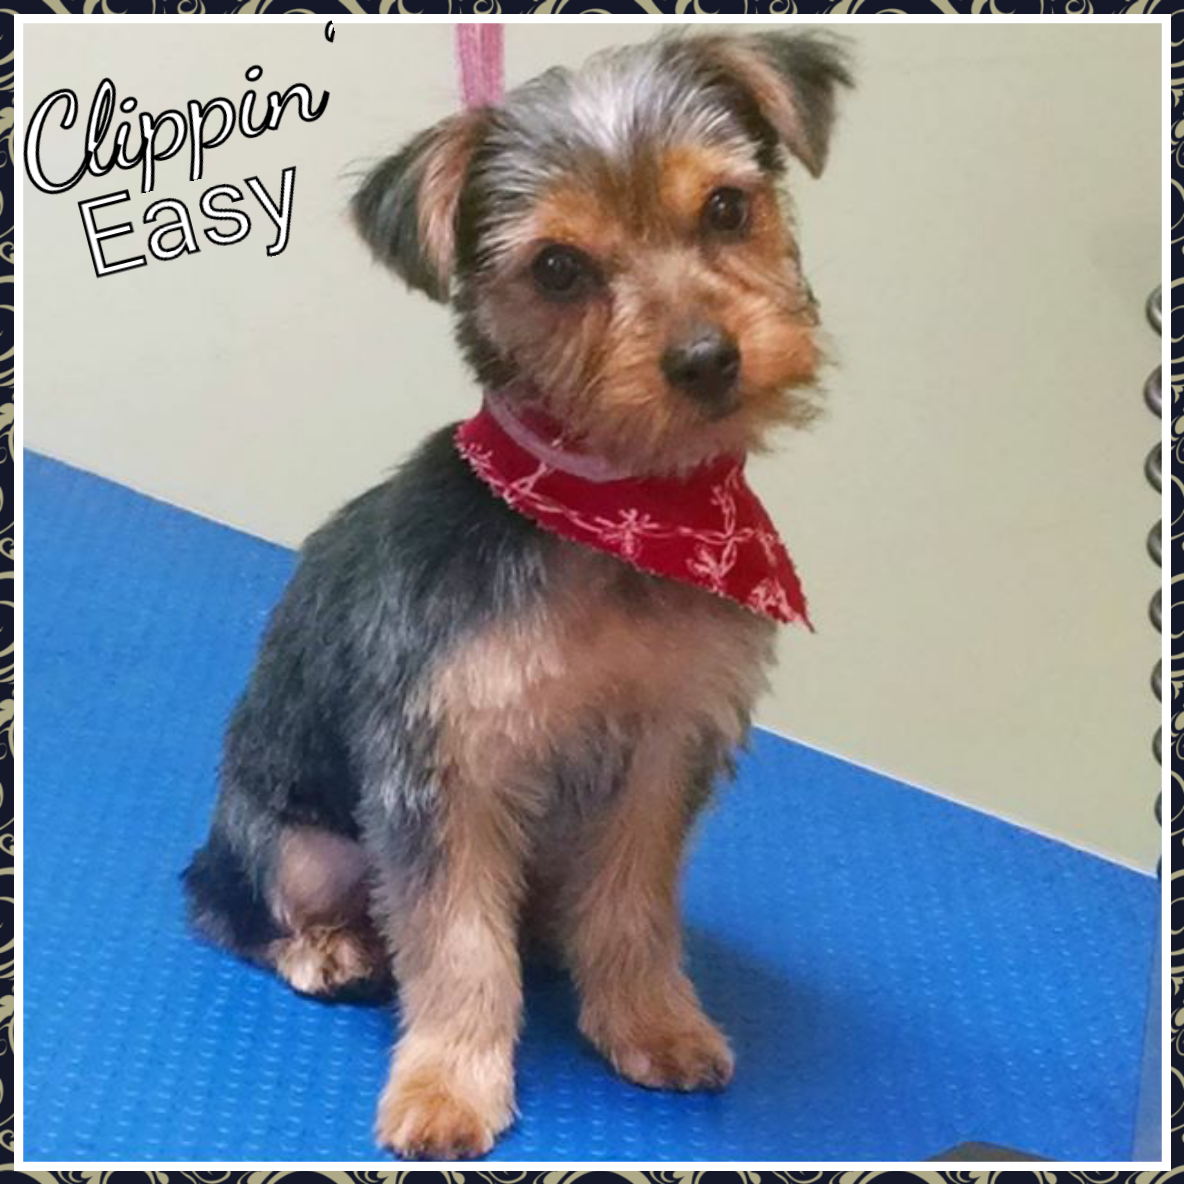 Clippin' Easy Pet Grooming 1267 Carding Machine Rd, Loudon Tennessee 37774